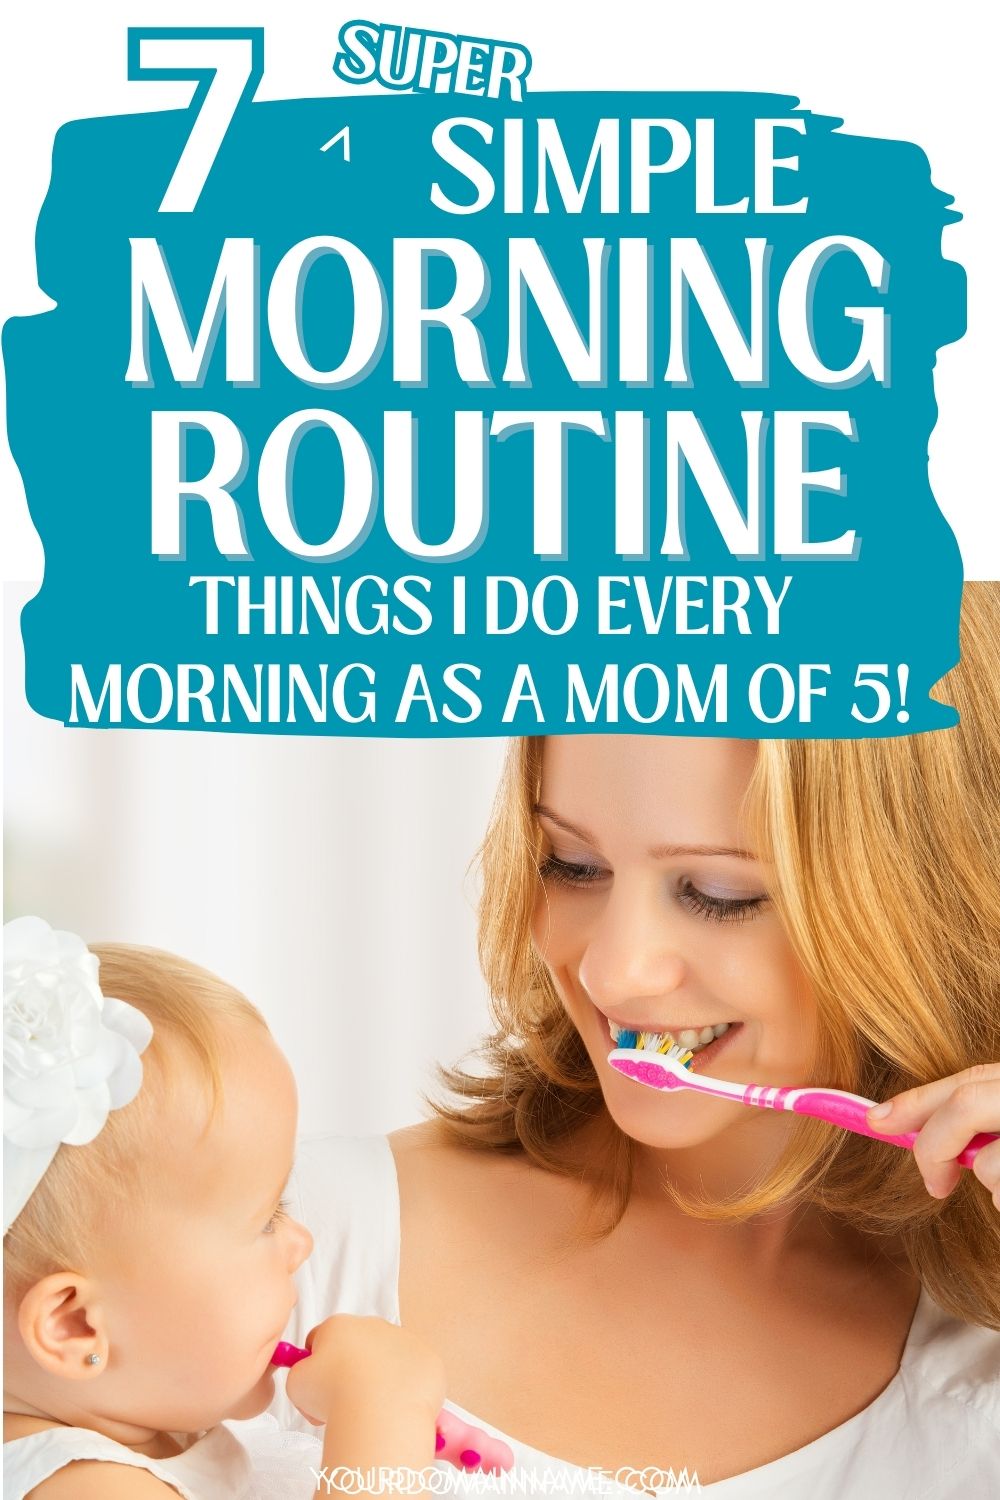 mom morning routine, text says 7 simple morning routine things to do